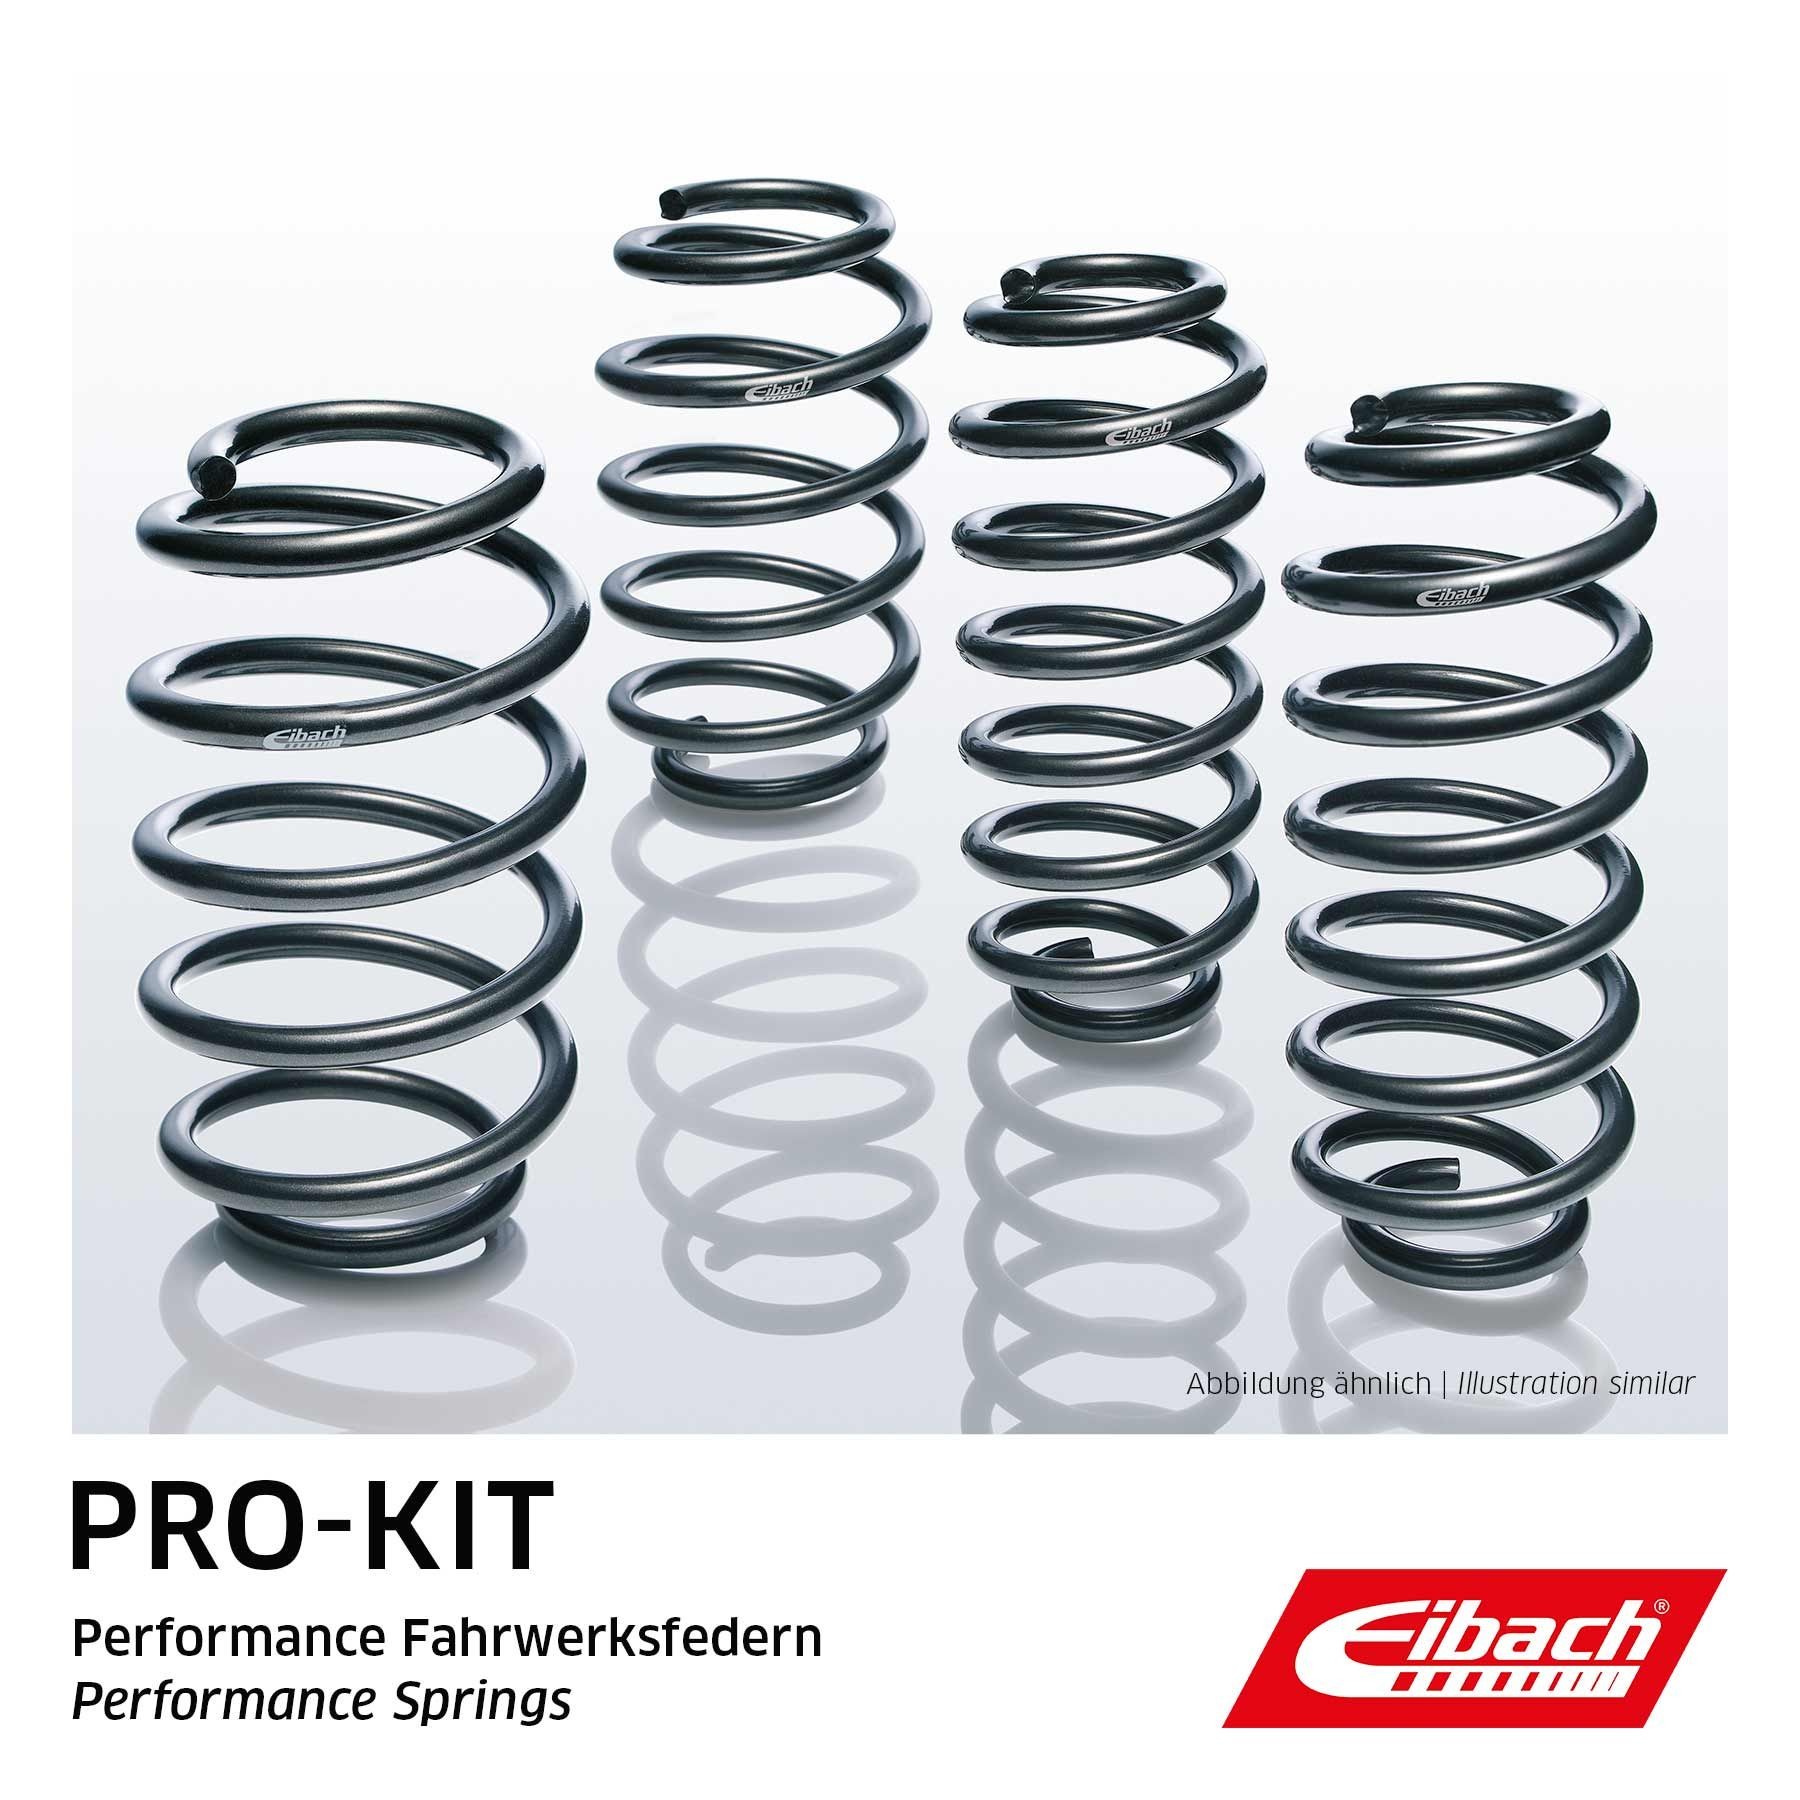 Suspension Kit, coil springs EIBACH E10-25-001-01-22 - Tuning spare parts for Mercedes order